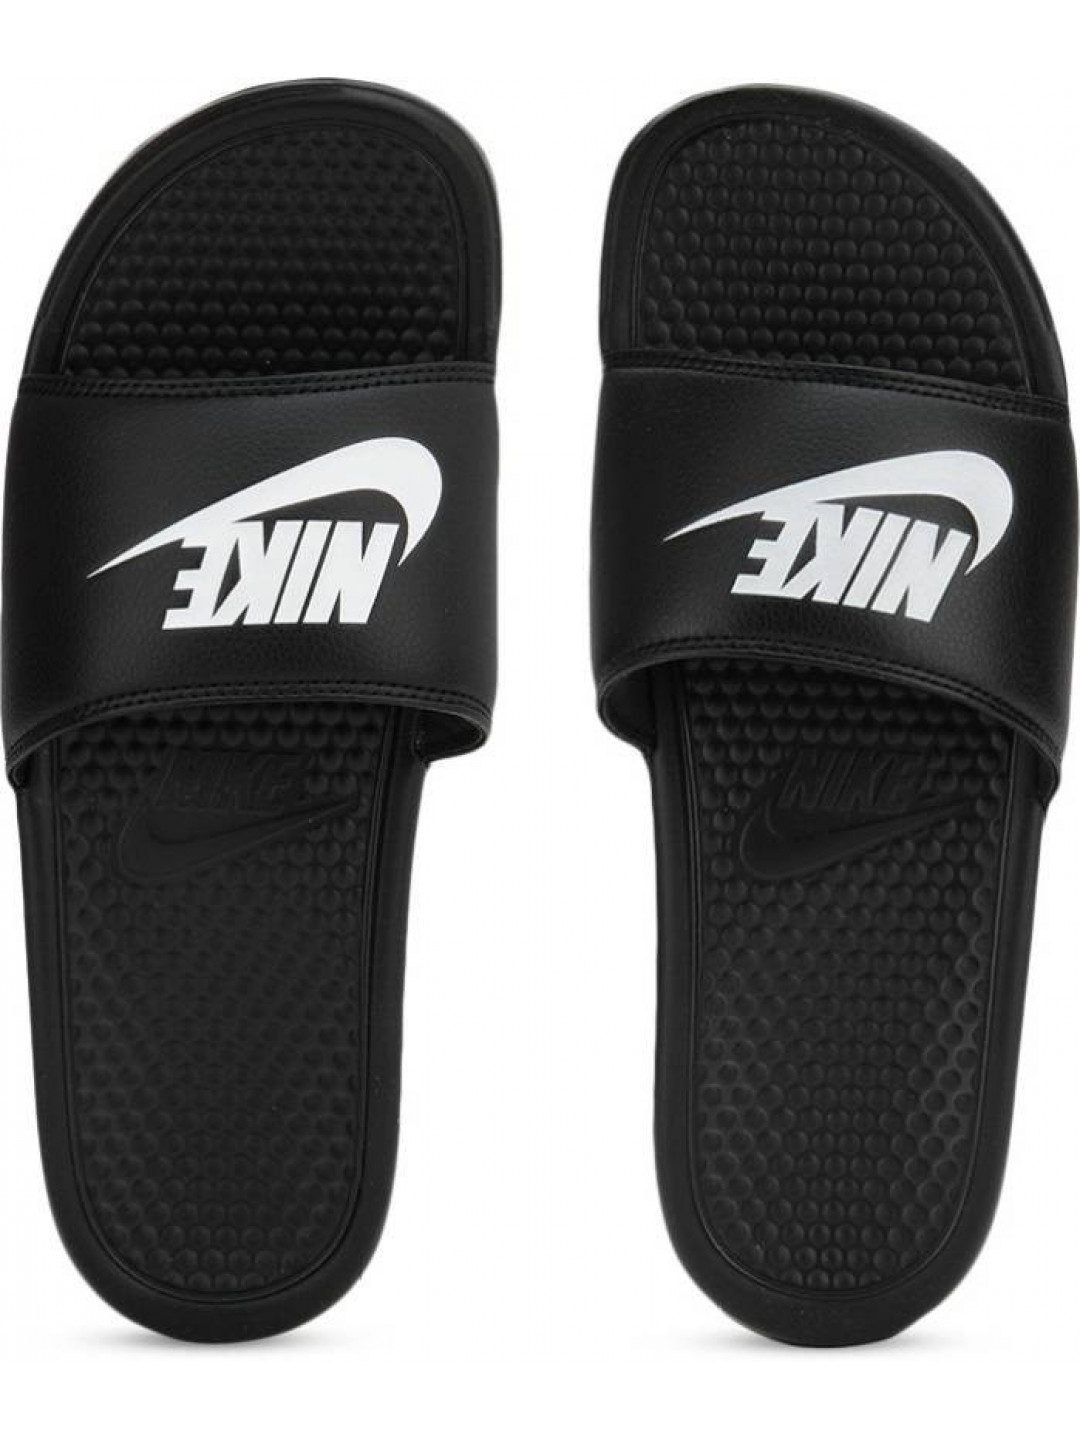 Original Nike Slippers in Surulere - Shoes, Unique Home Of Sports | Jiji.ng